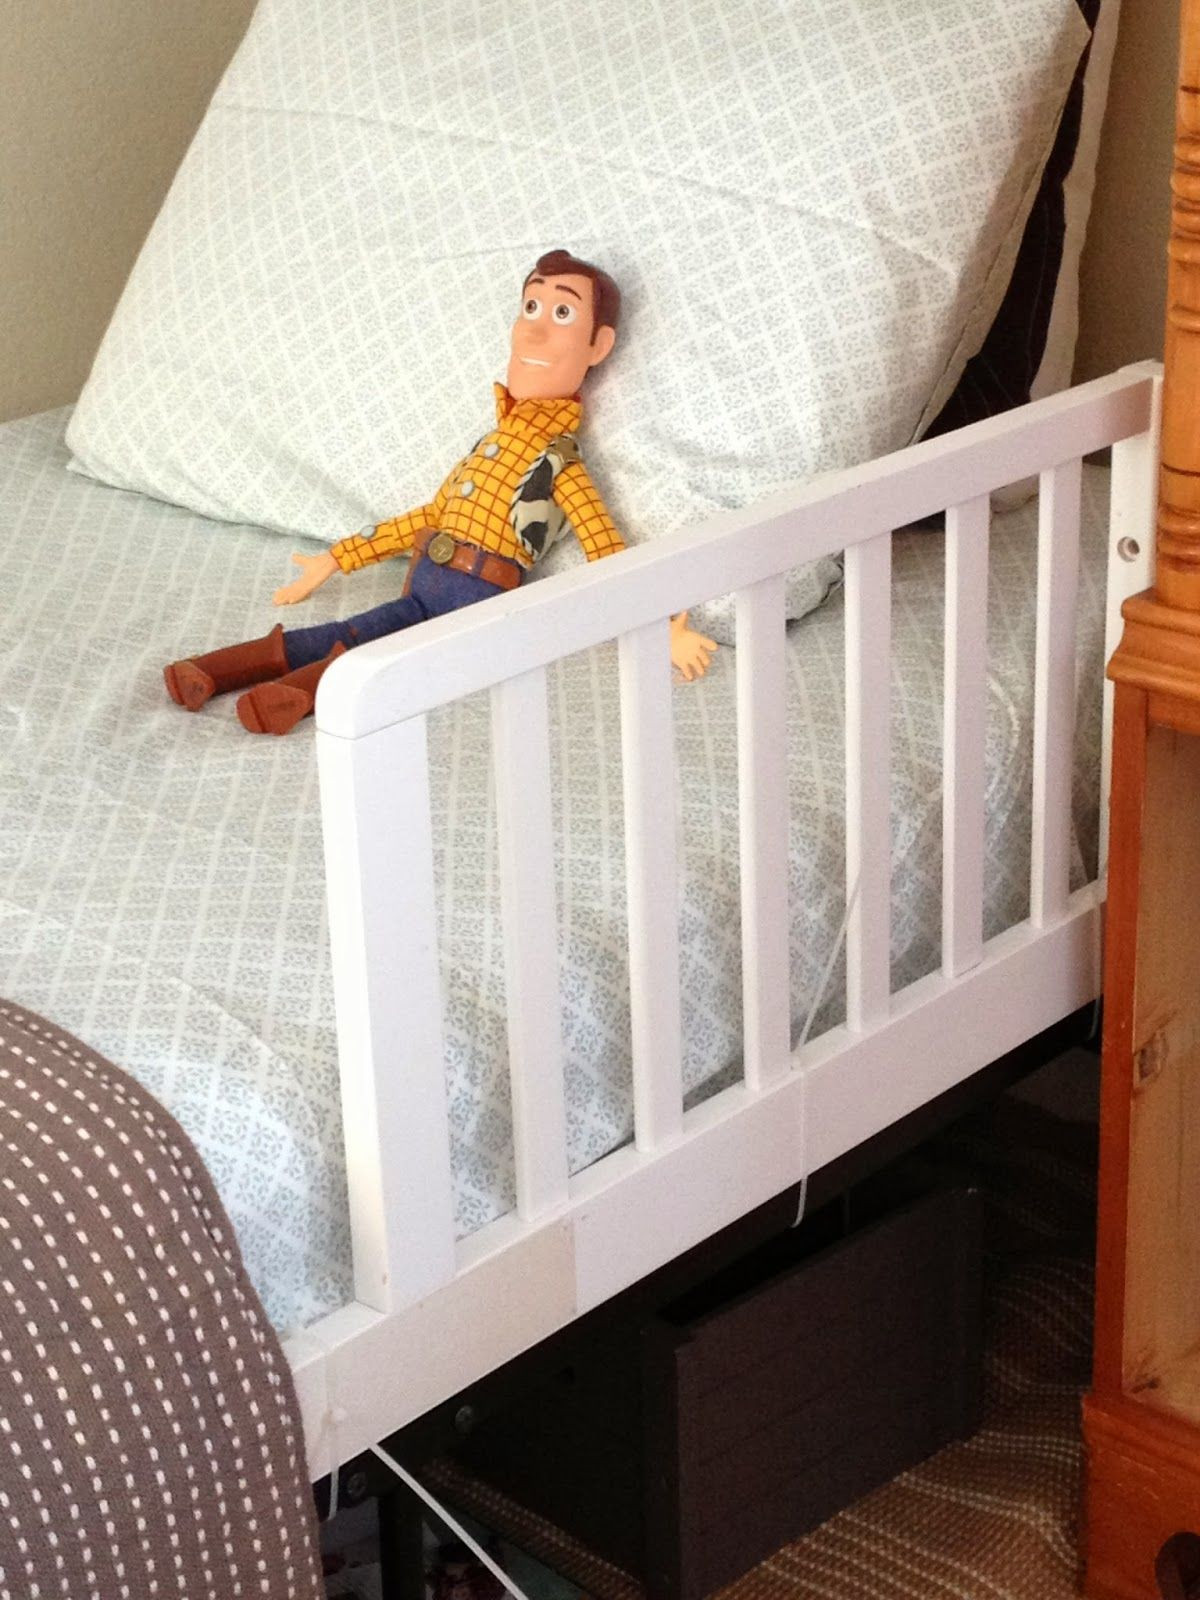 DIY Bed Rail For Toddler
 Diy safety rail for a toddler bed in 2019